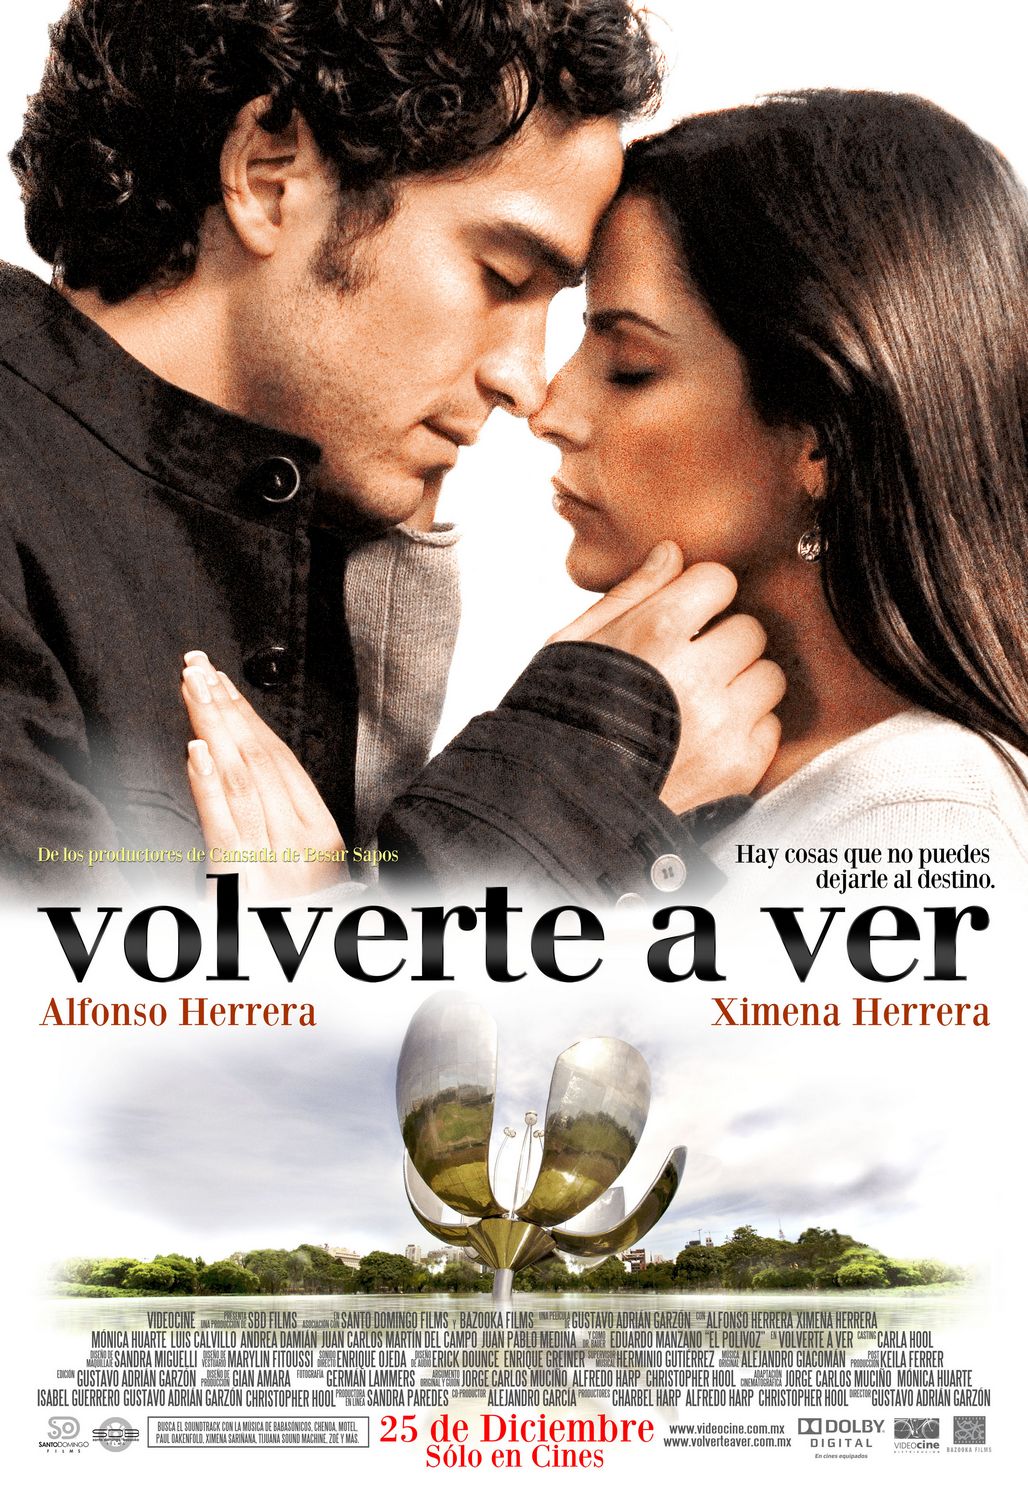 Extra Large Movie Poster Image for Volverte a ver (#2 of 2)